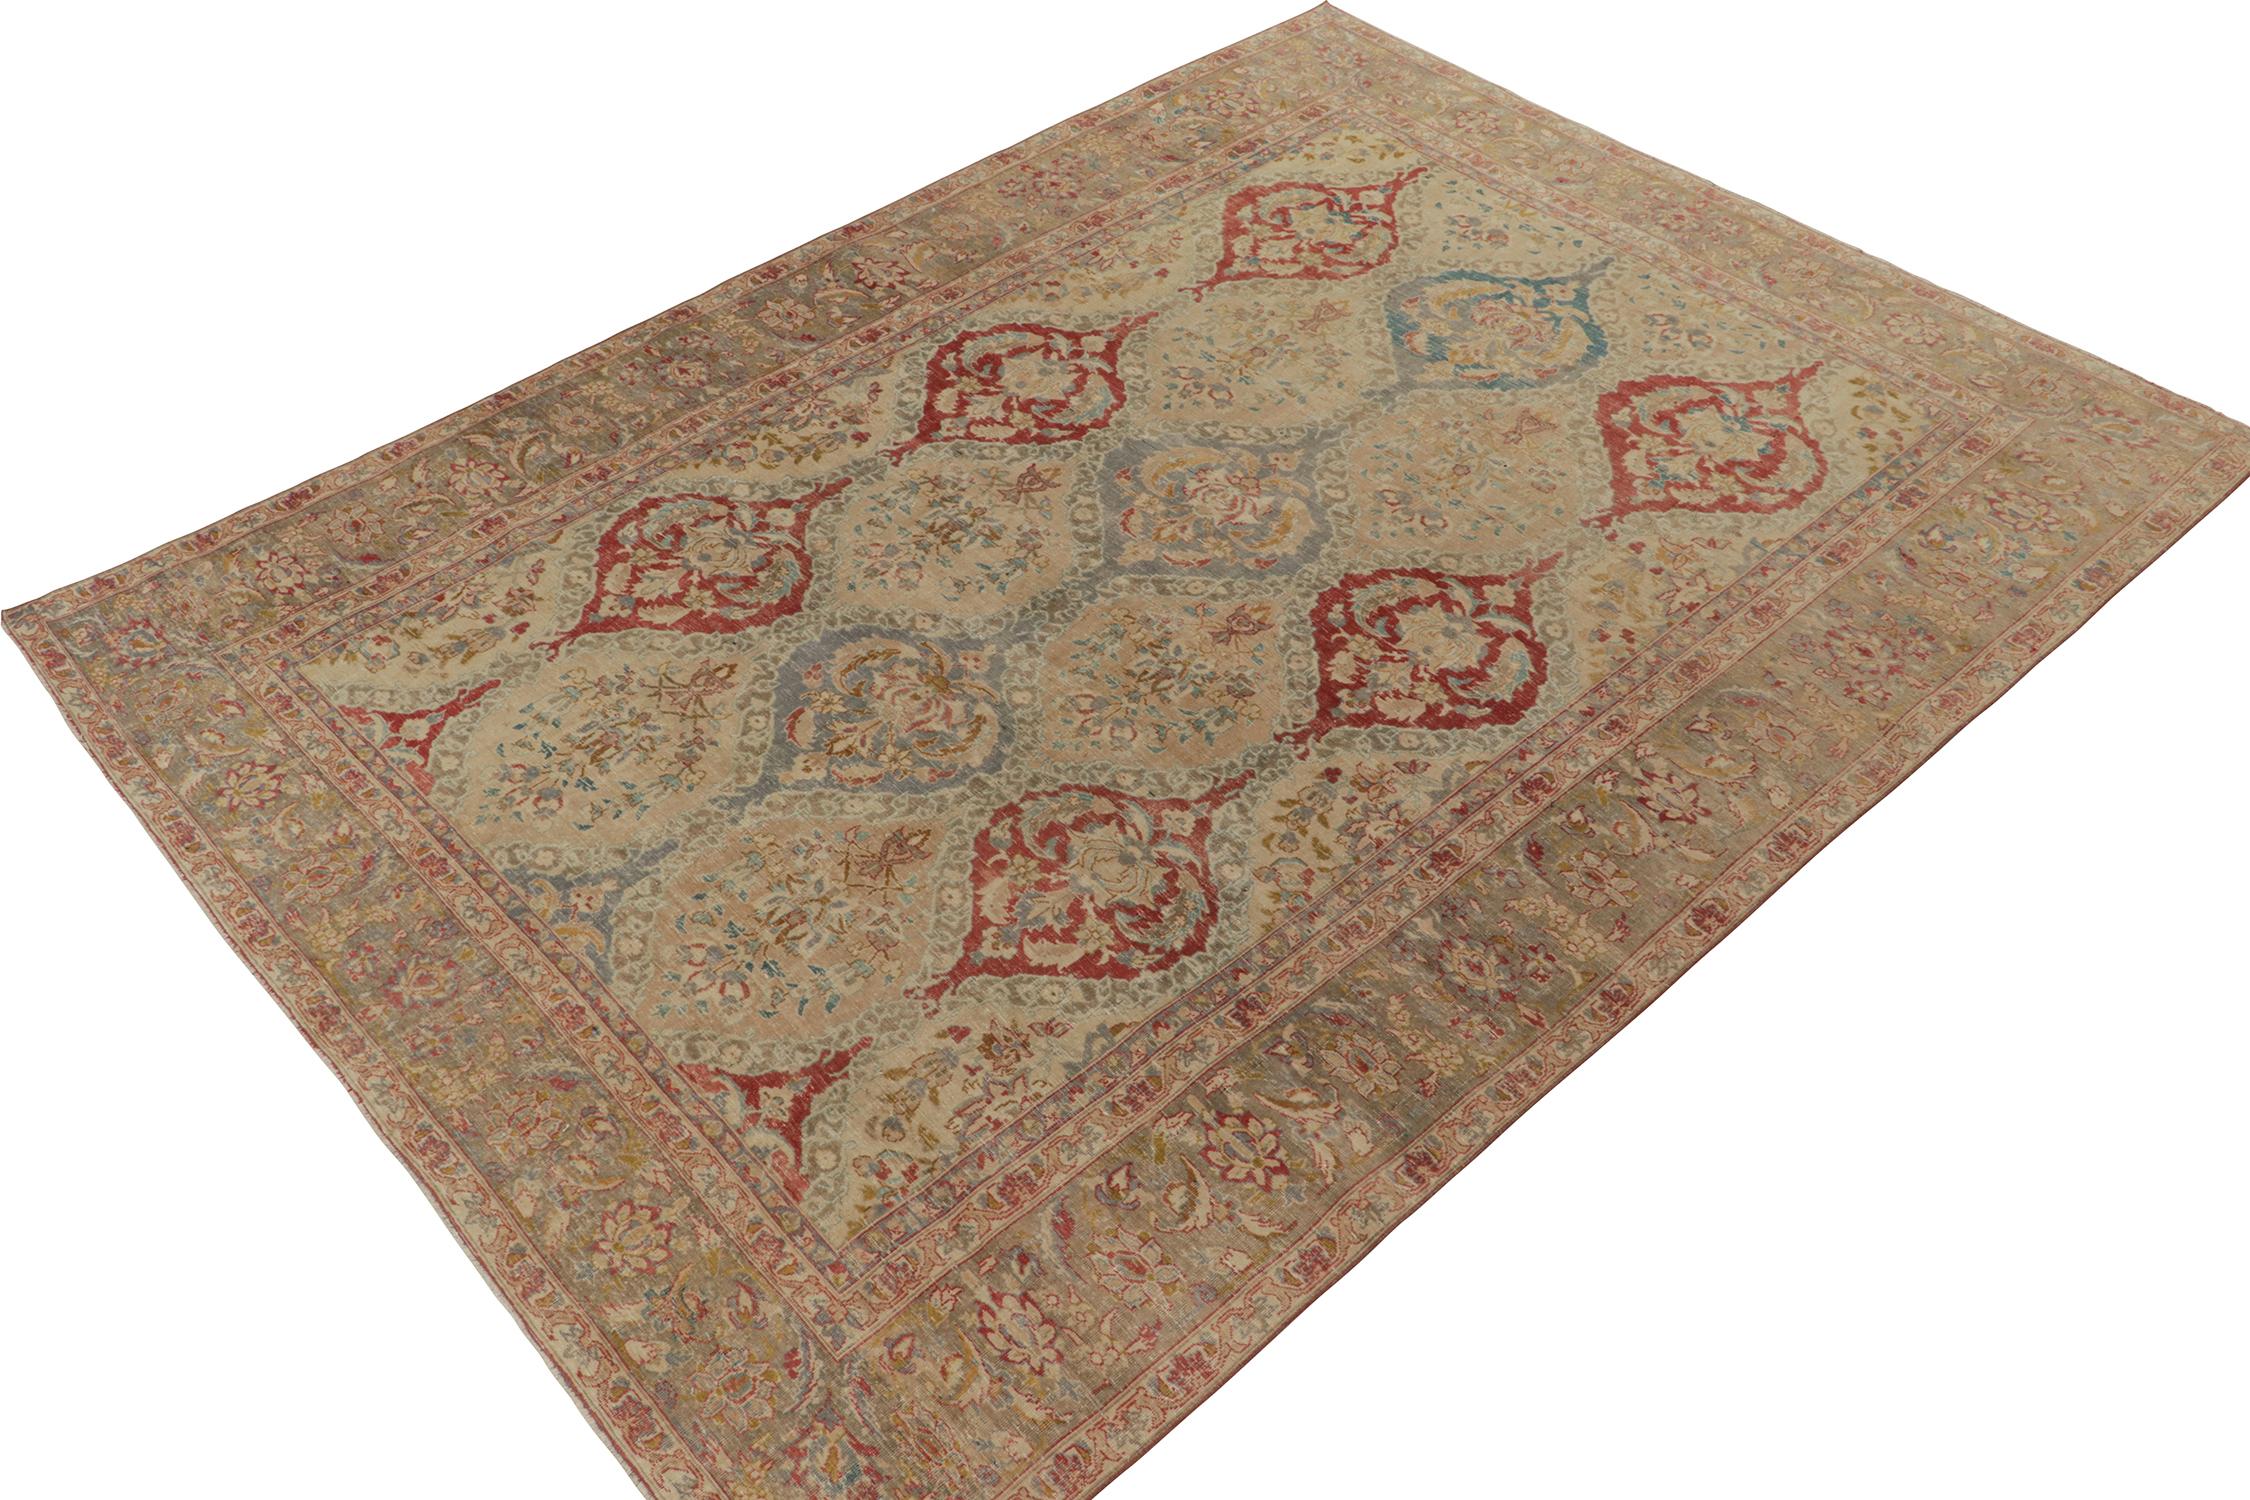 A 9x12 antique Tabriz rug from Rug & Kilim’s classic Persian selections, hand-knotted in wool circa 1920-1940. This gorgeous piece features meticulously detailed floral patterns in soft beige with red, blue and gold colors. Keen eyes will note a